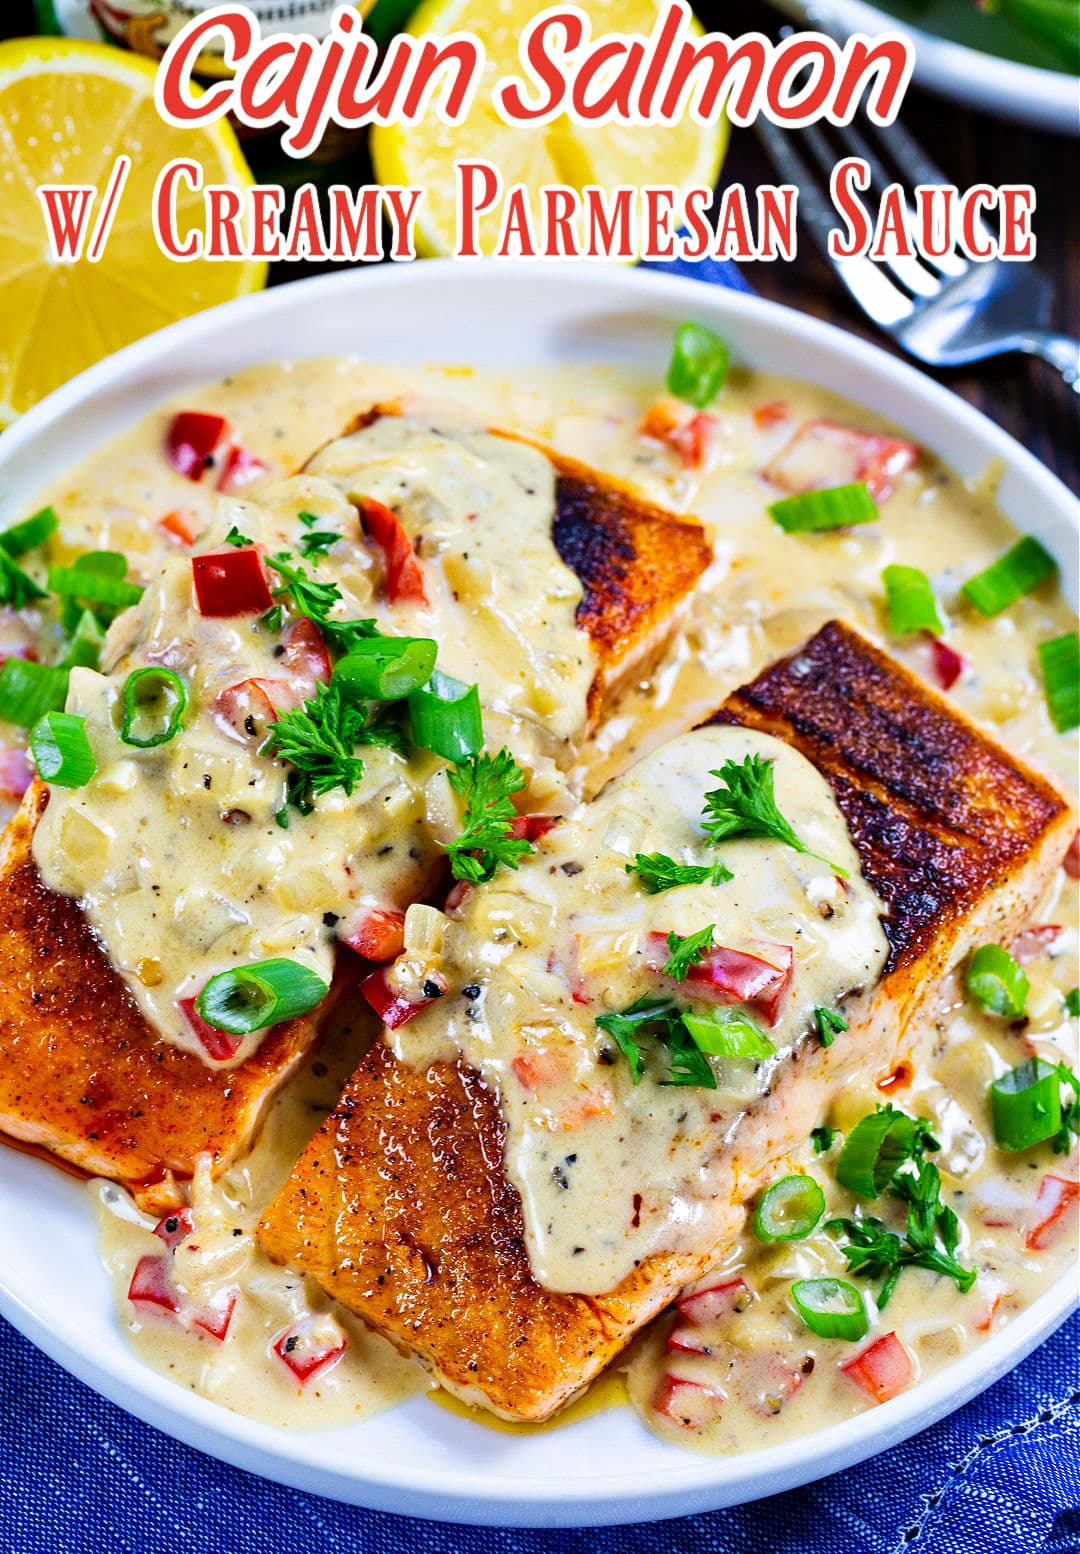 Cajun Salmon with Creamy Parmesan Sauce dished up on a plate.